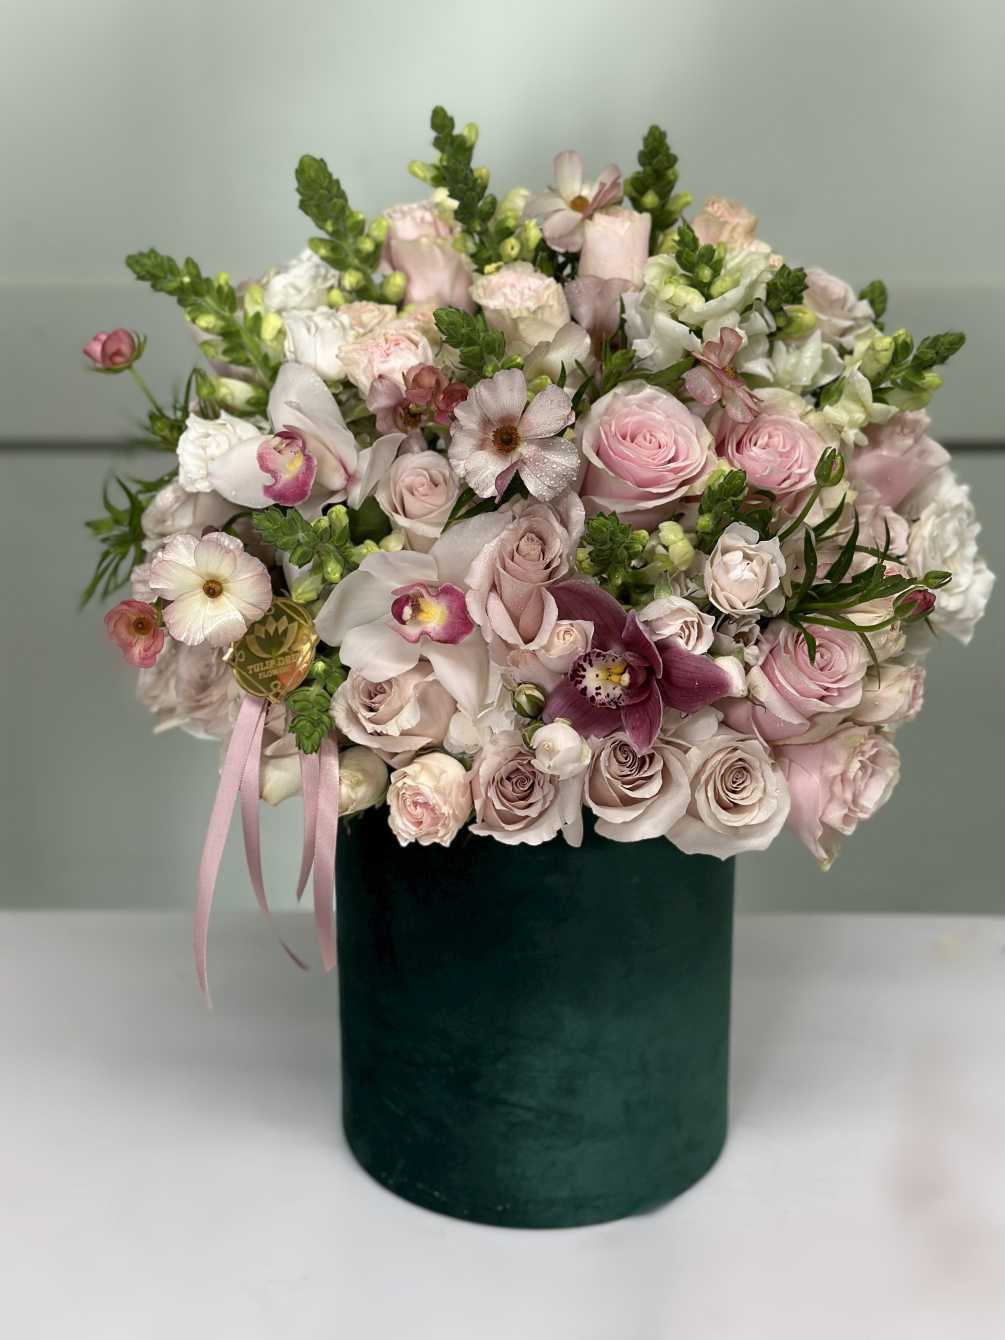 A rich collection of roses, spray roses, Orchids, Snapdragons, Butterfly Ranunculus, and